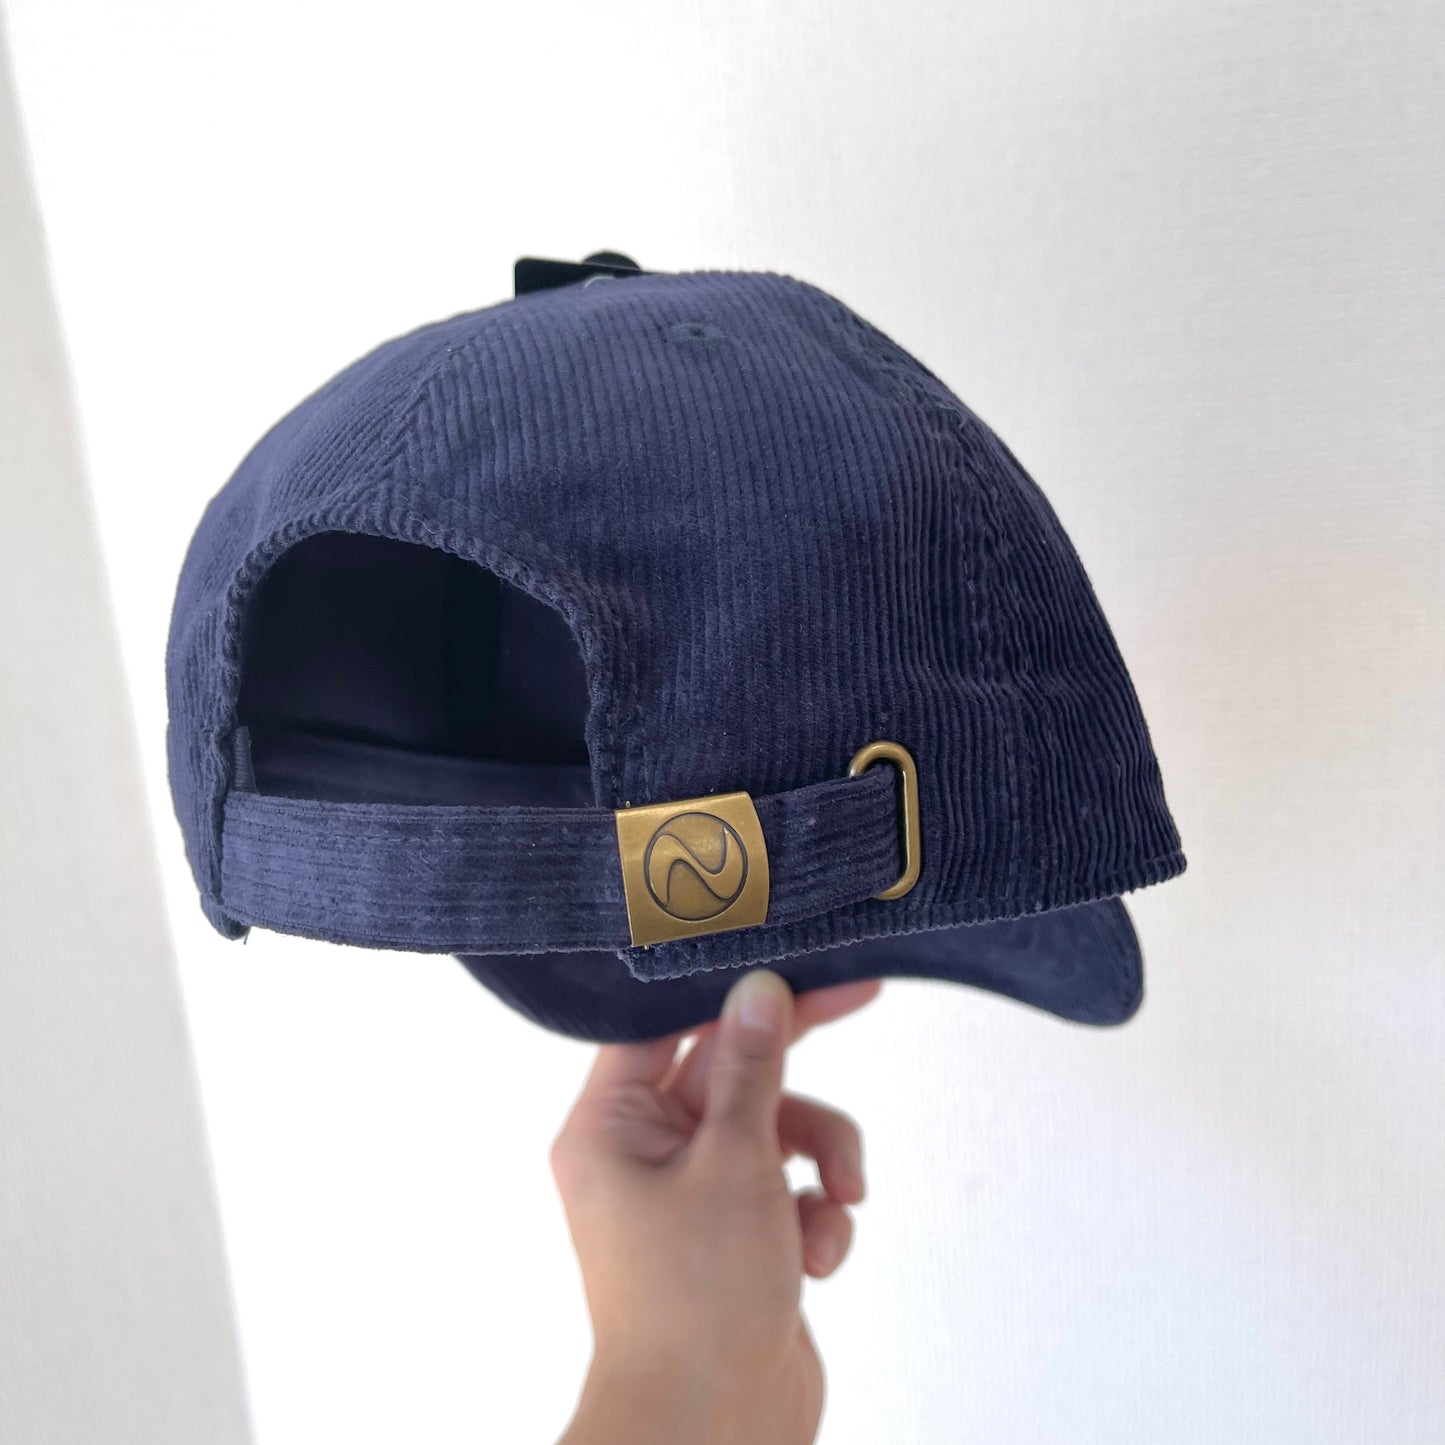 [Parent and child dolphin] Corduroy embroidered cap [shipped in mid-March]